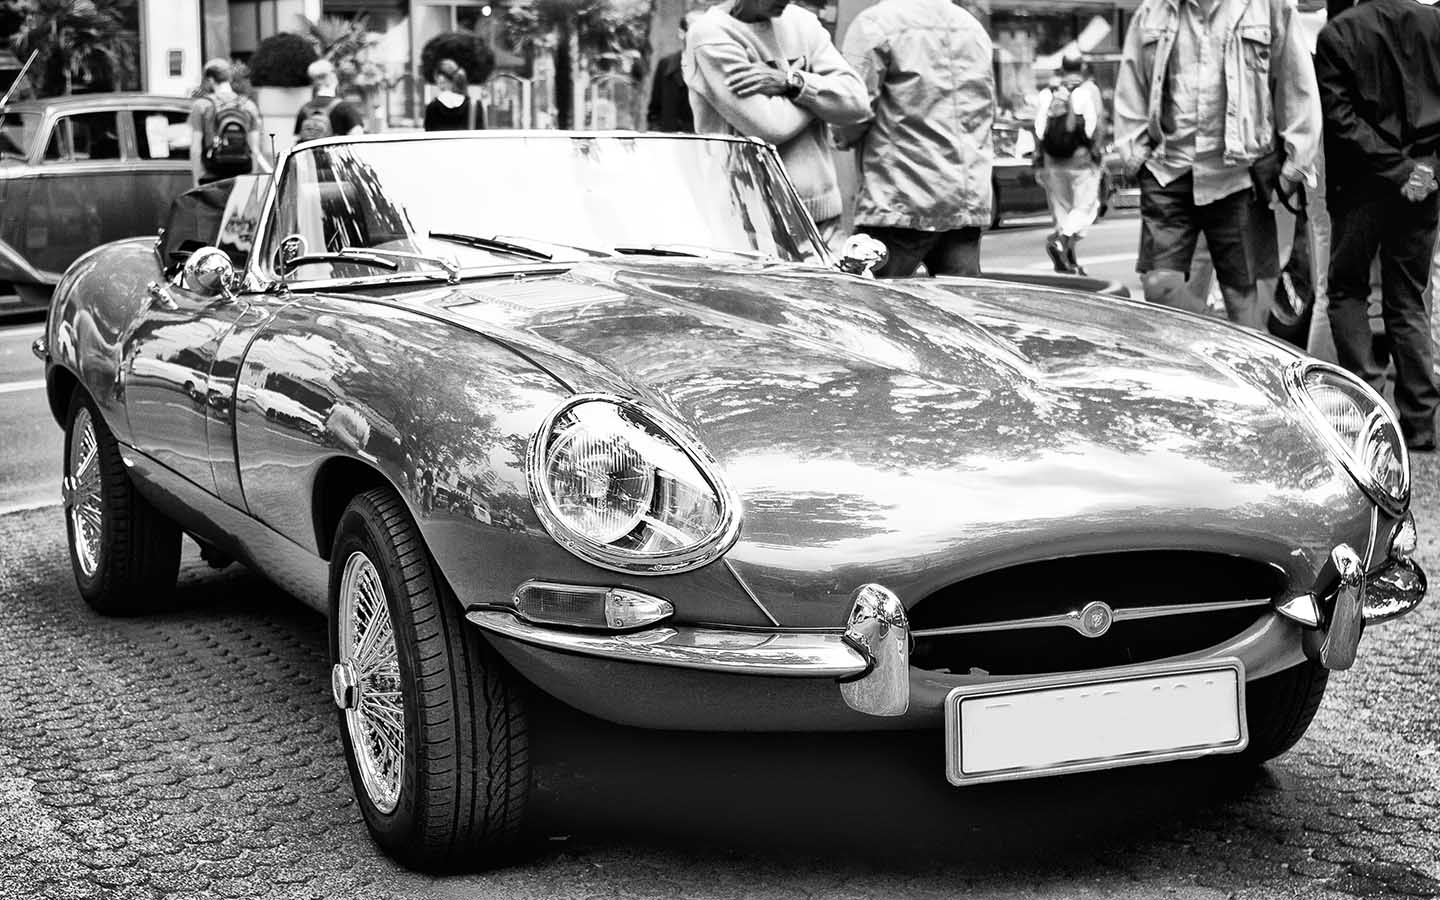 history of jaguar e-type reveals it as one of the most beautiful cars